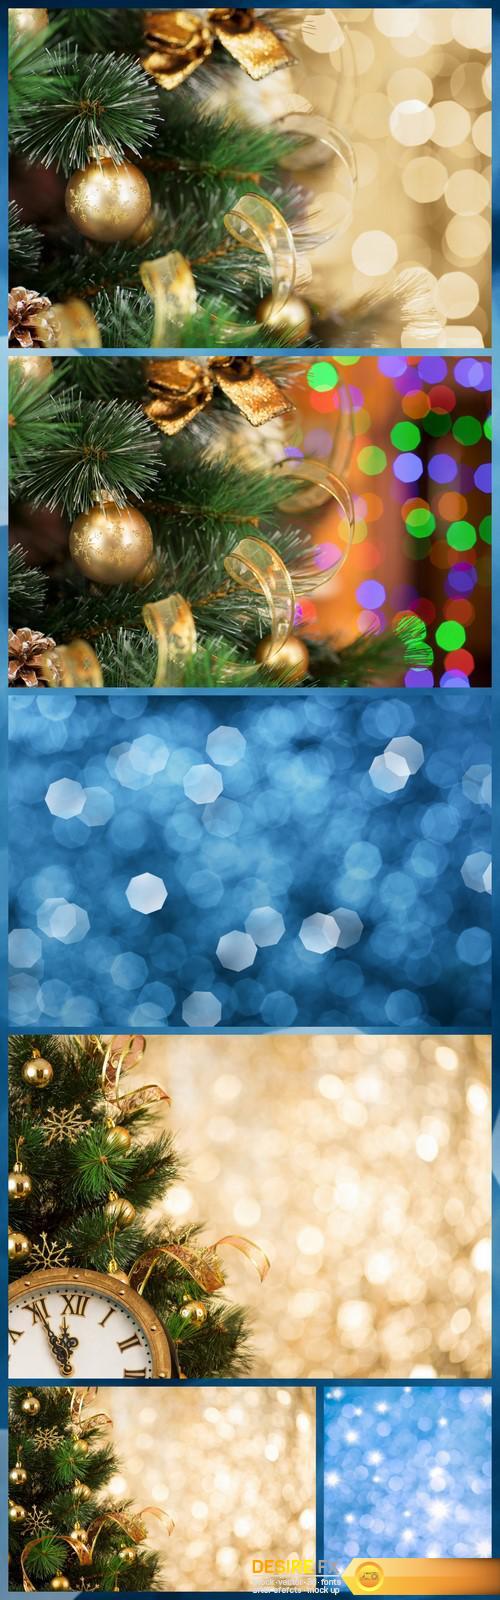 Christmas tree background with gold blurred light 6X JPEG